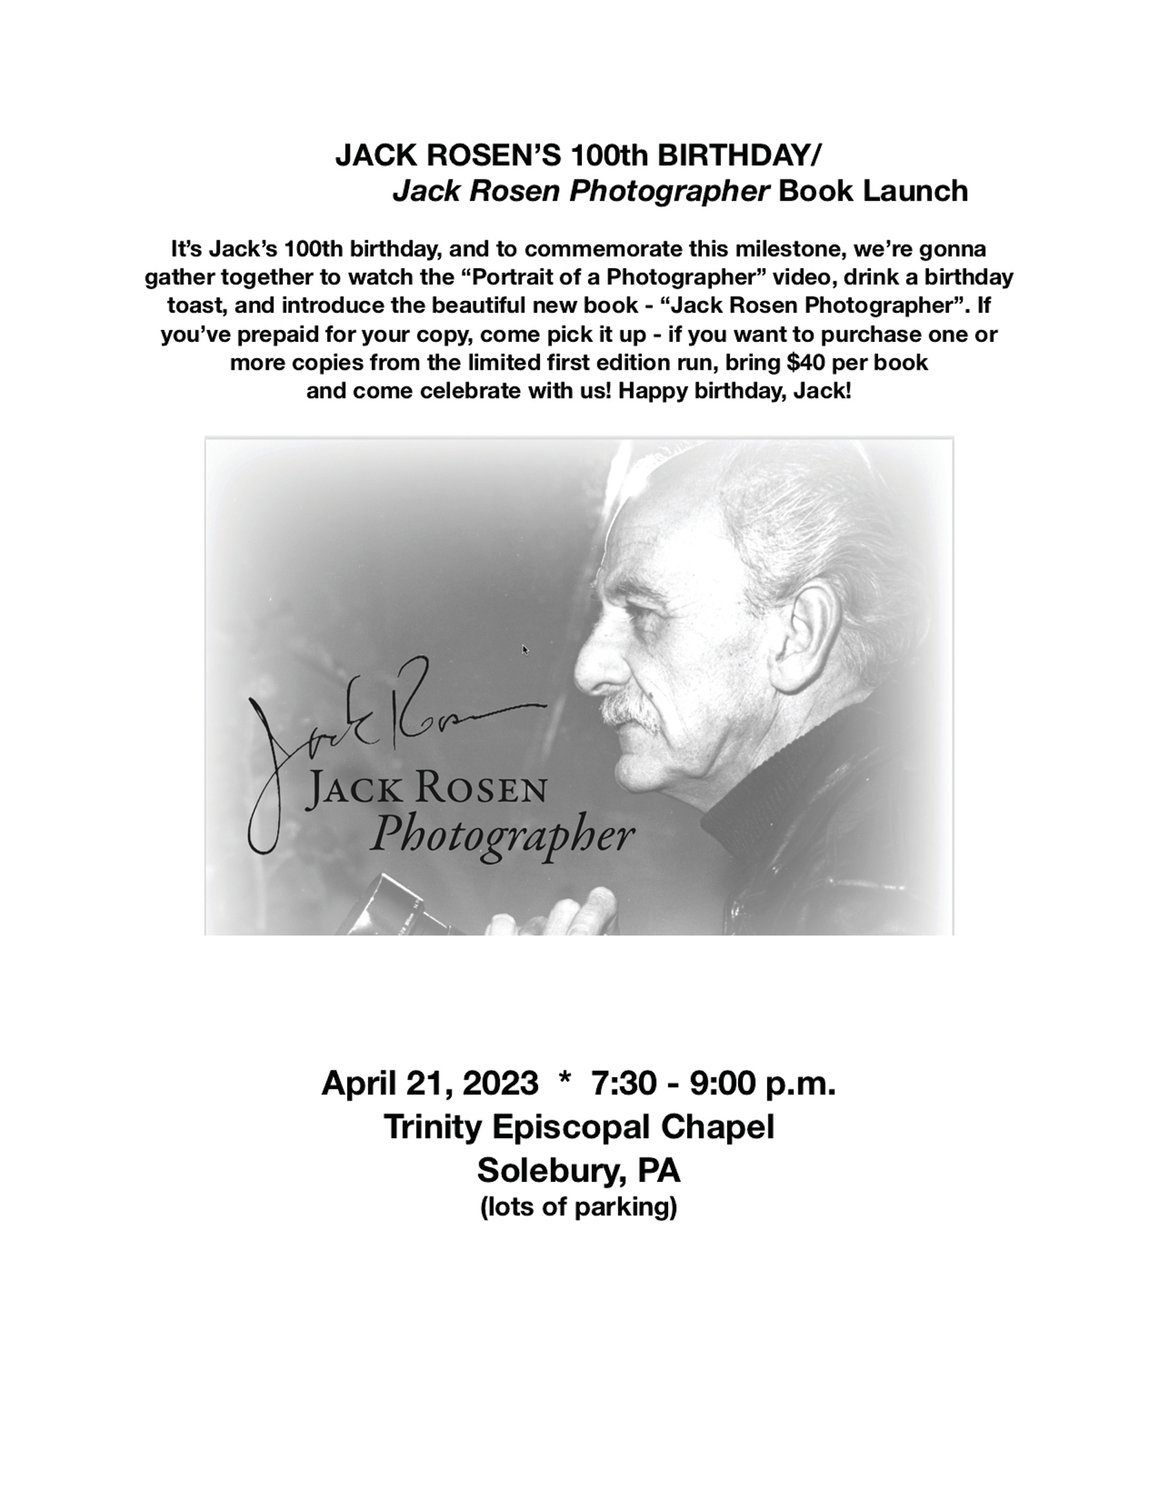 “Jack Rosen Photographer” is available for purchase on what would have been his 100th birthday.